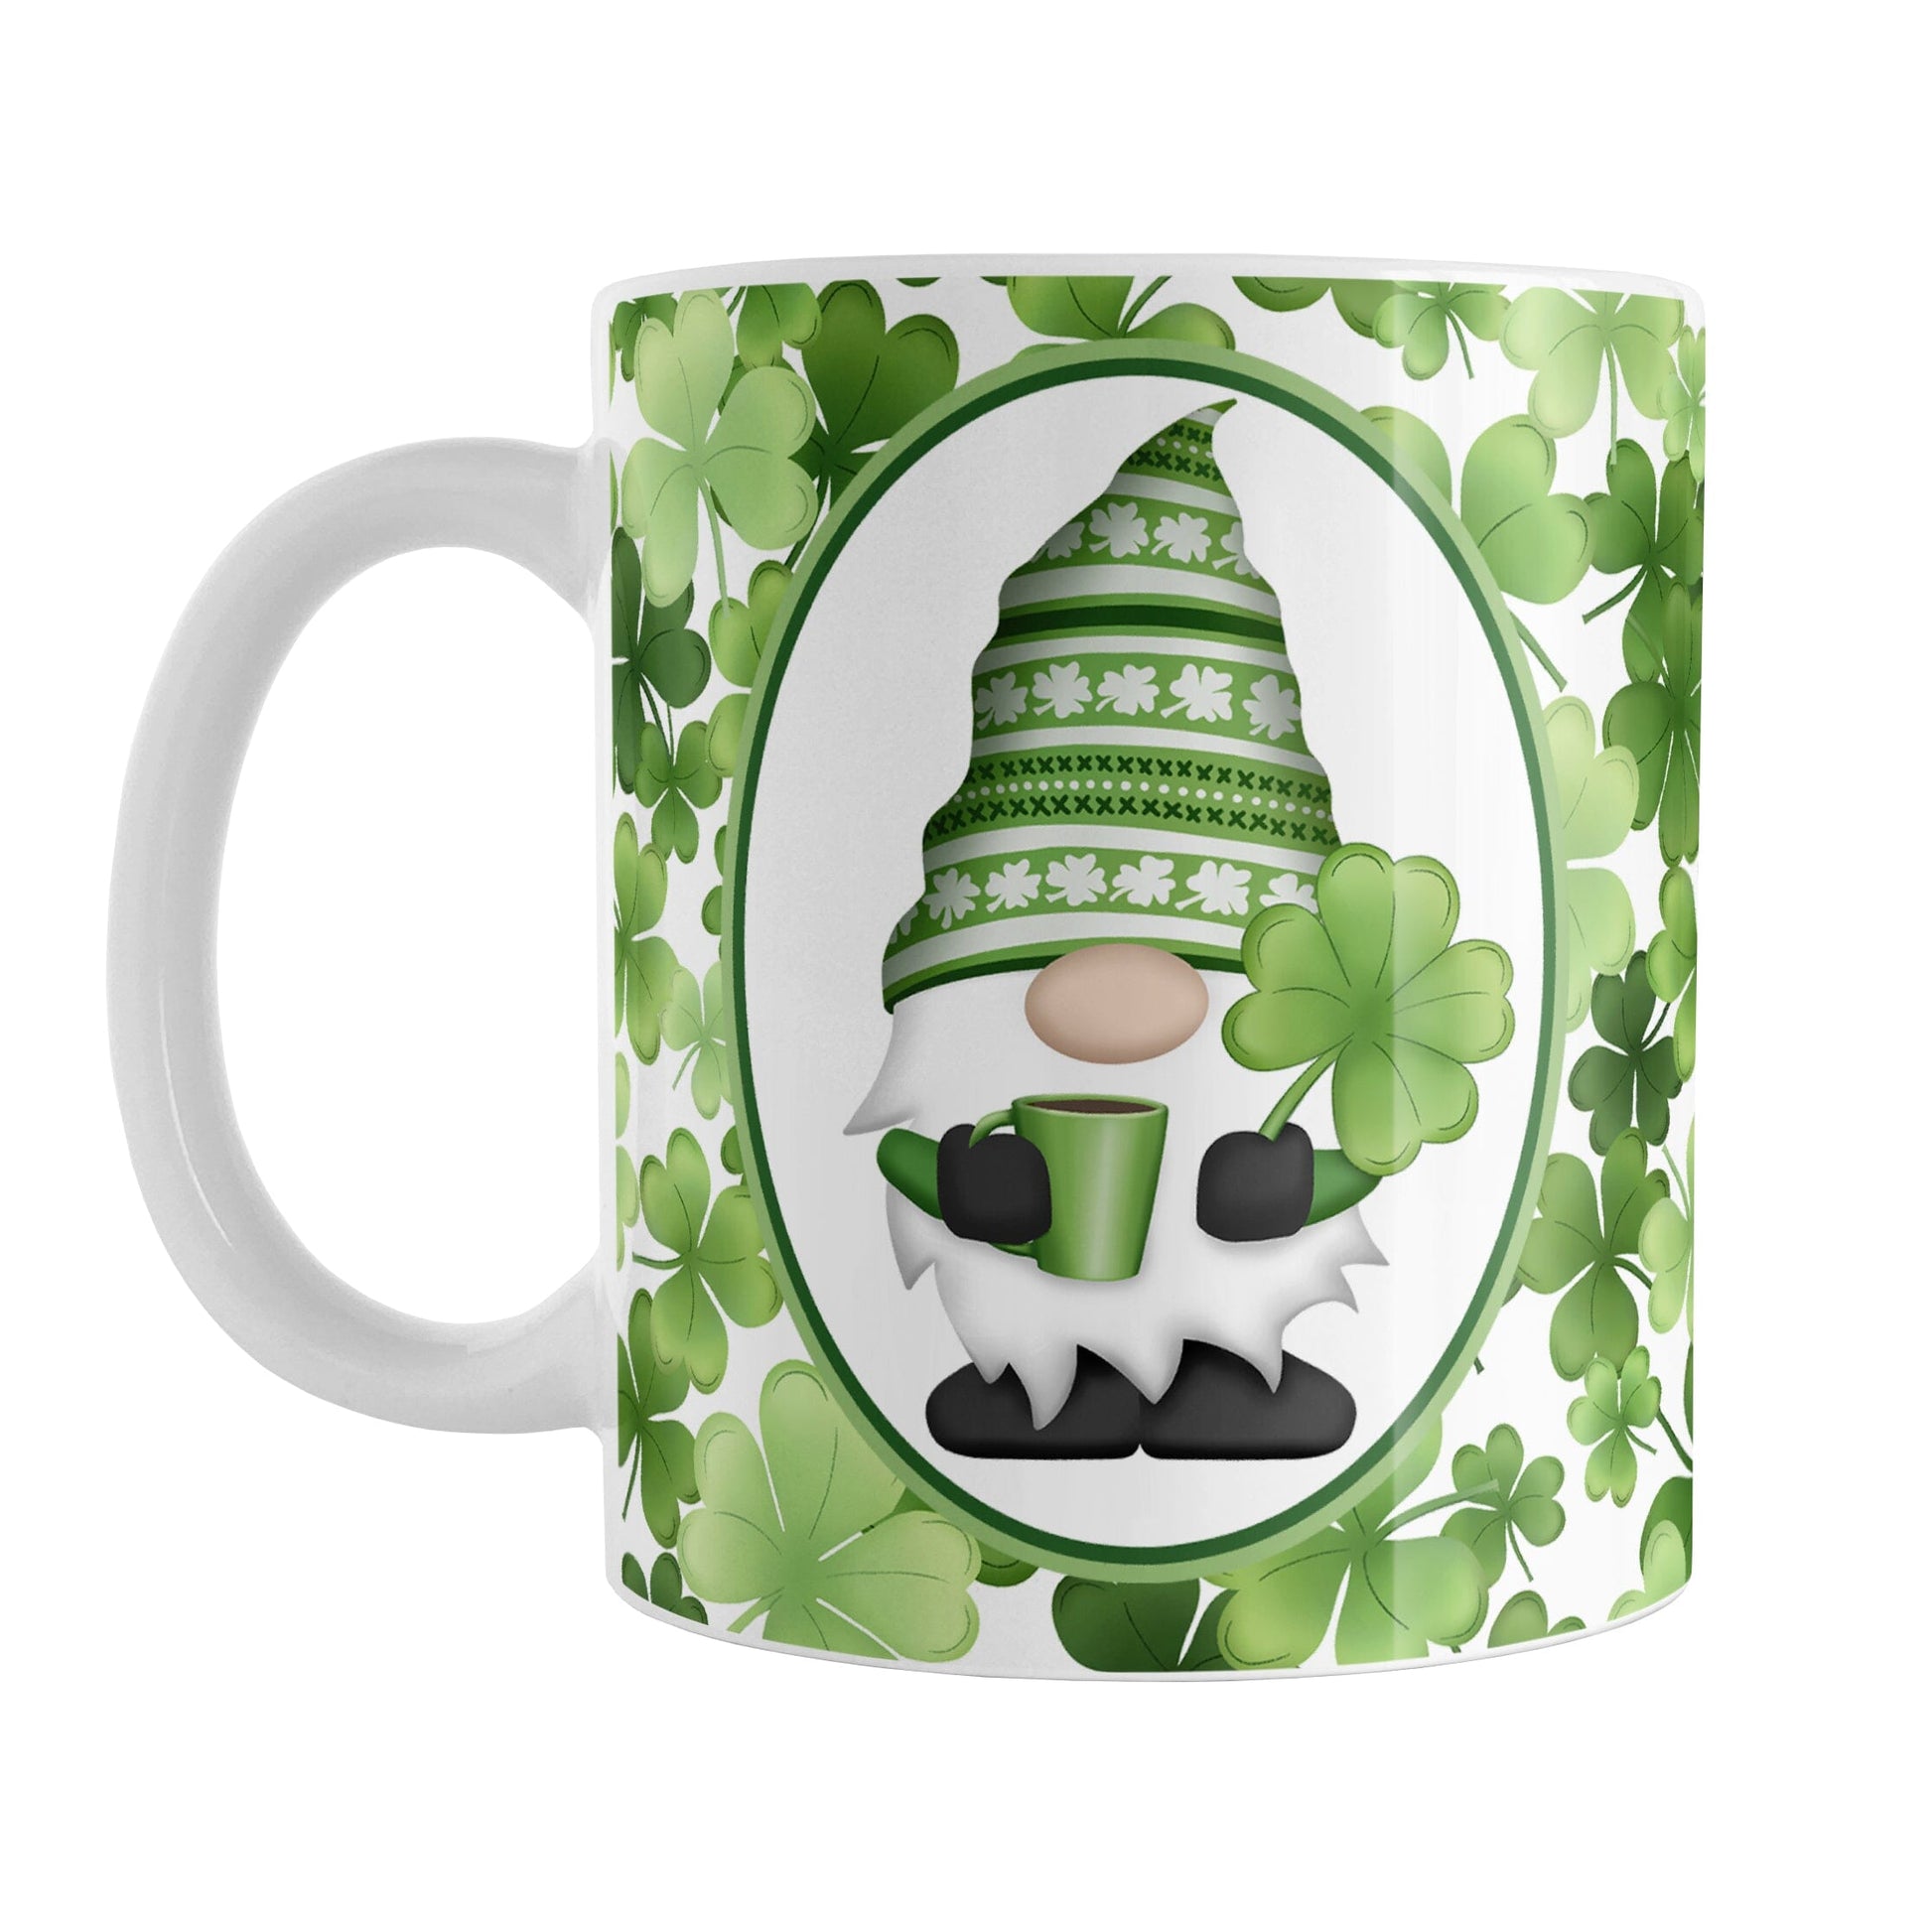 Green Gnome Shamrocks Mug (11oz) at Amy's Coffee Mugs. A ceramic coffee mug designed with an adorable green hat gnome holding a 4-leaf clover and a hot beverage in a white oval over a pattern of green shamrocks in different shades of green that wrap around the mug to the handle.